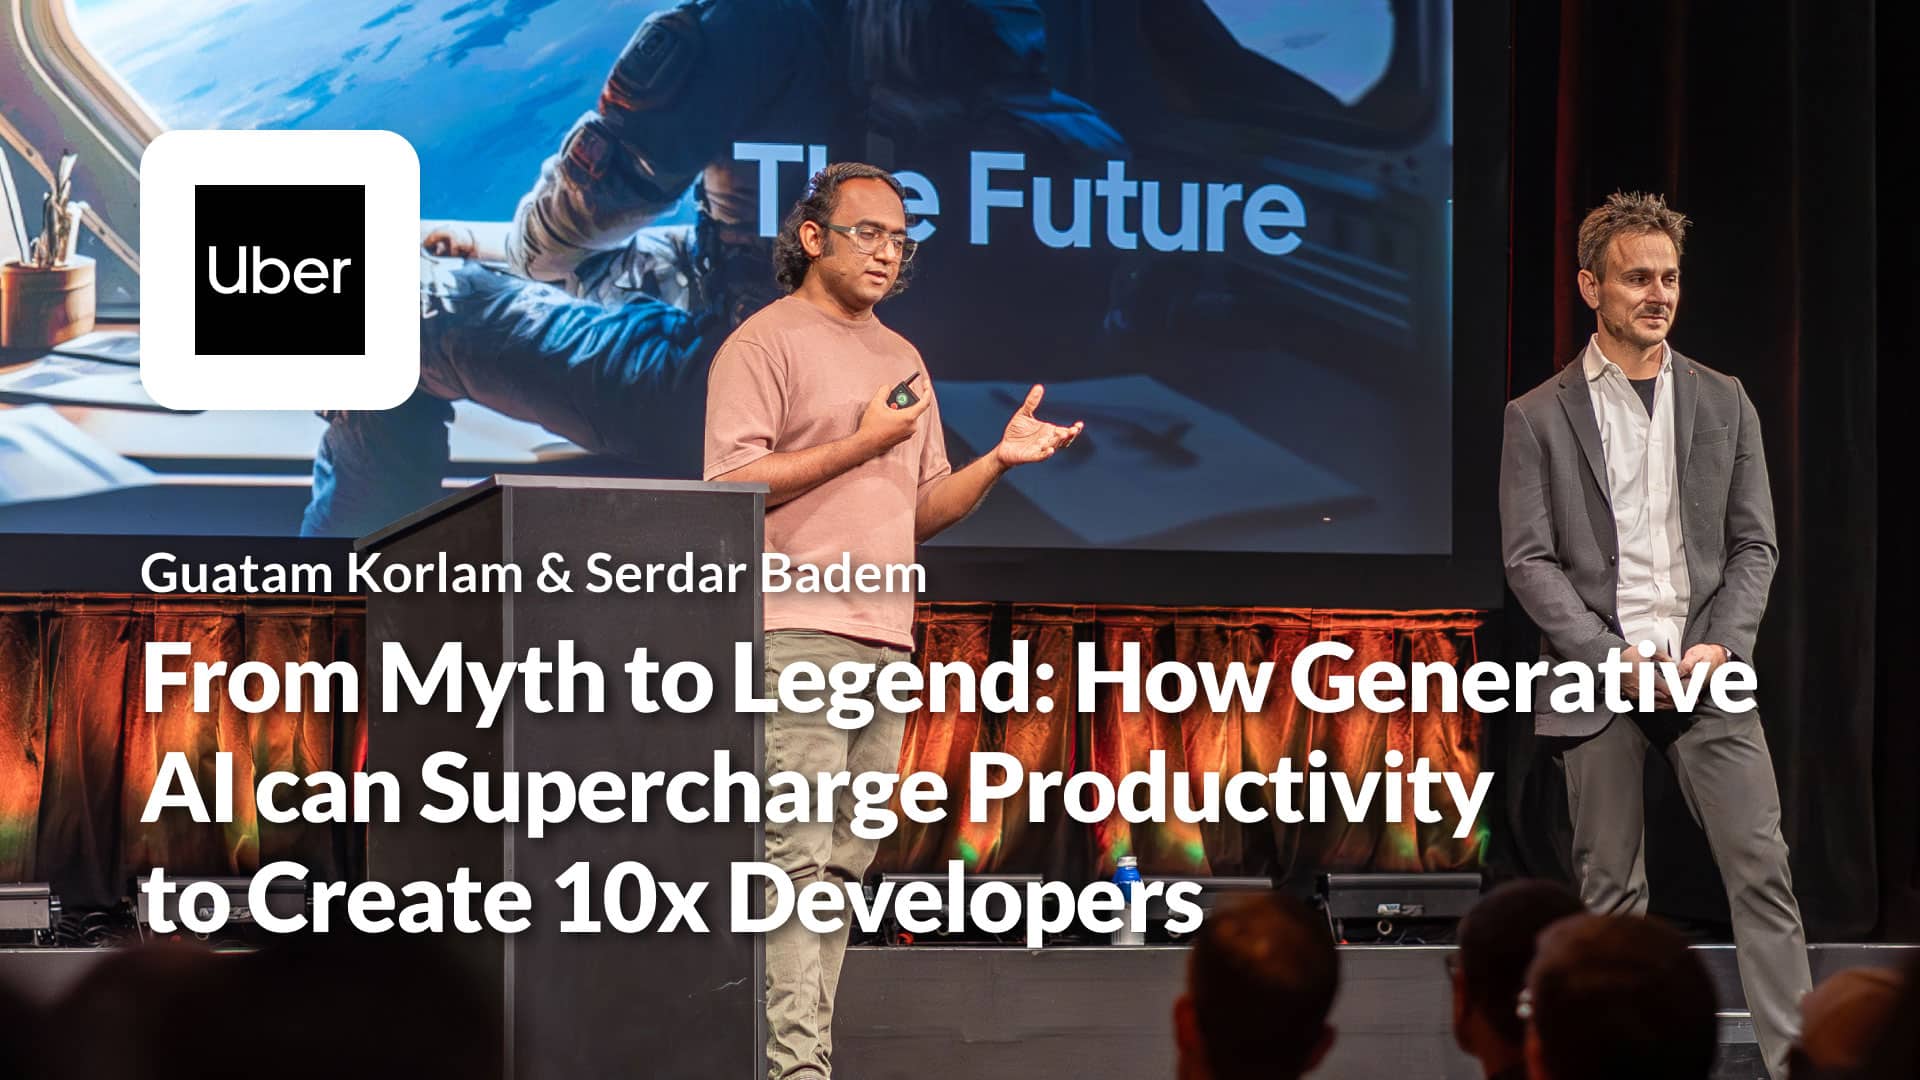 From Myth to Legend: How Generative AI Can Supercharge Productivity to Create 10x Developers